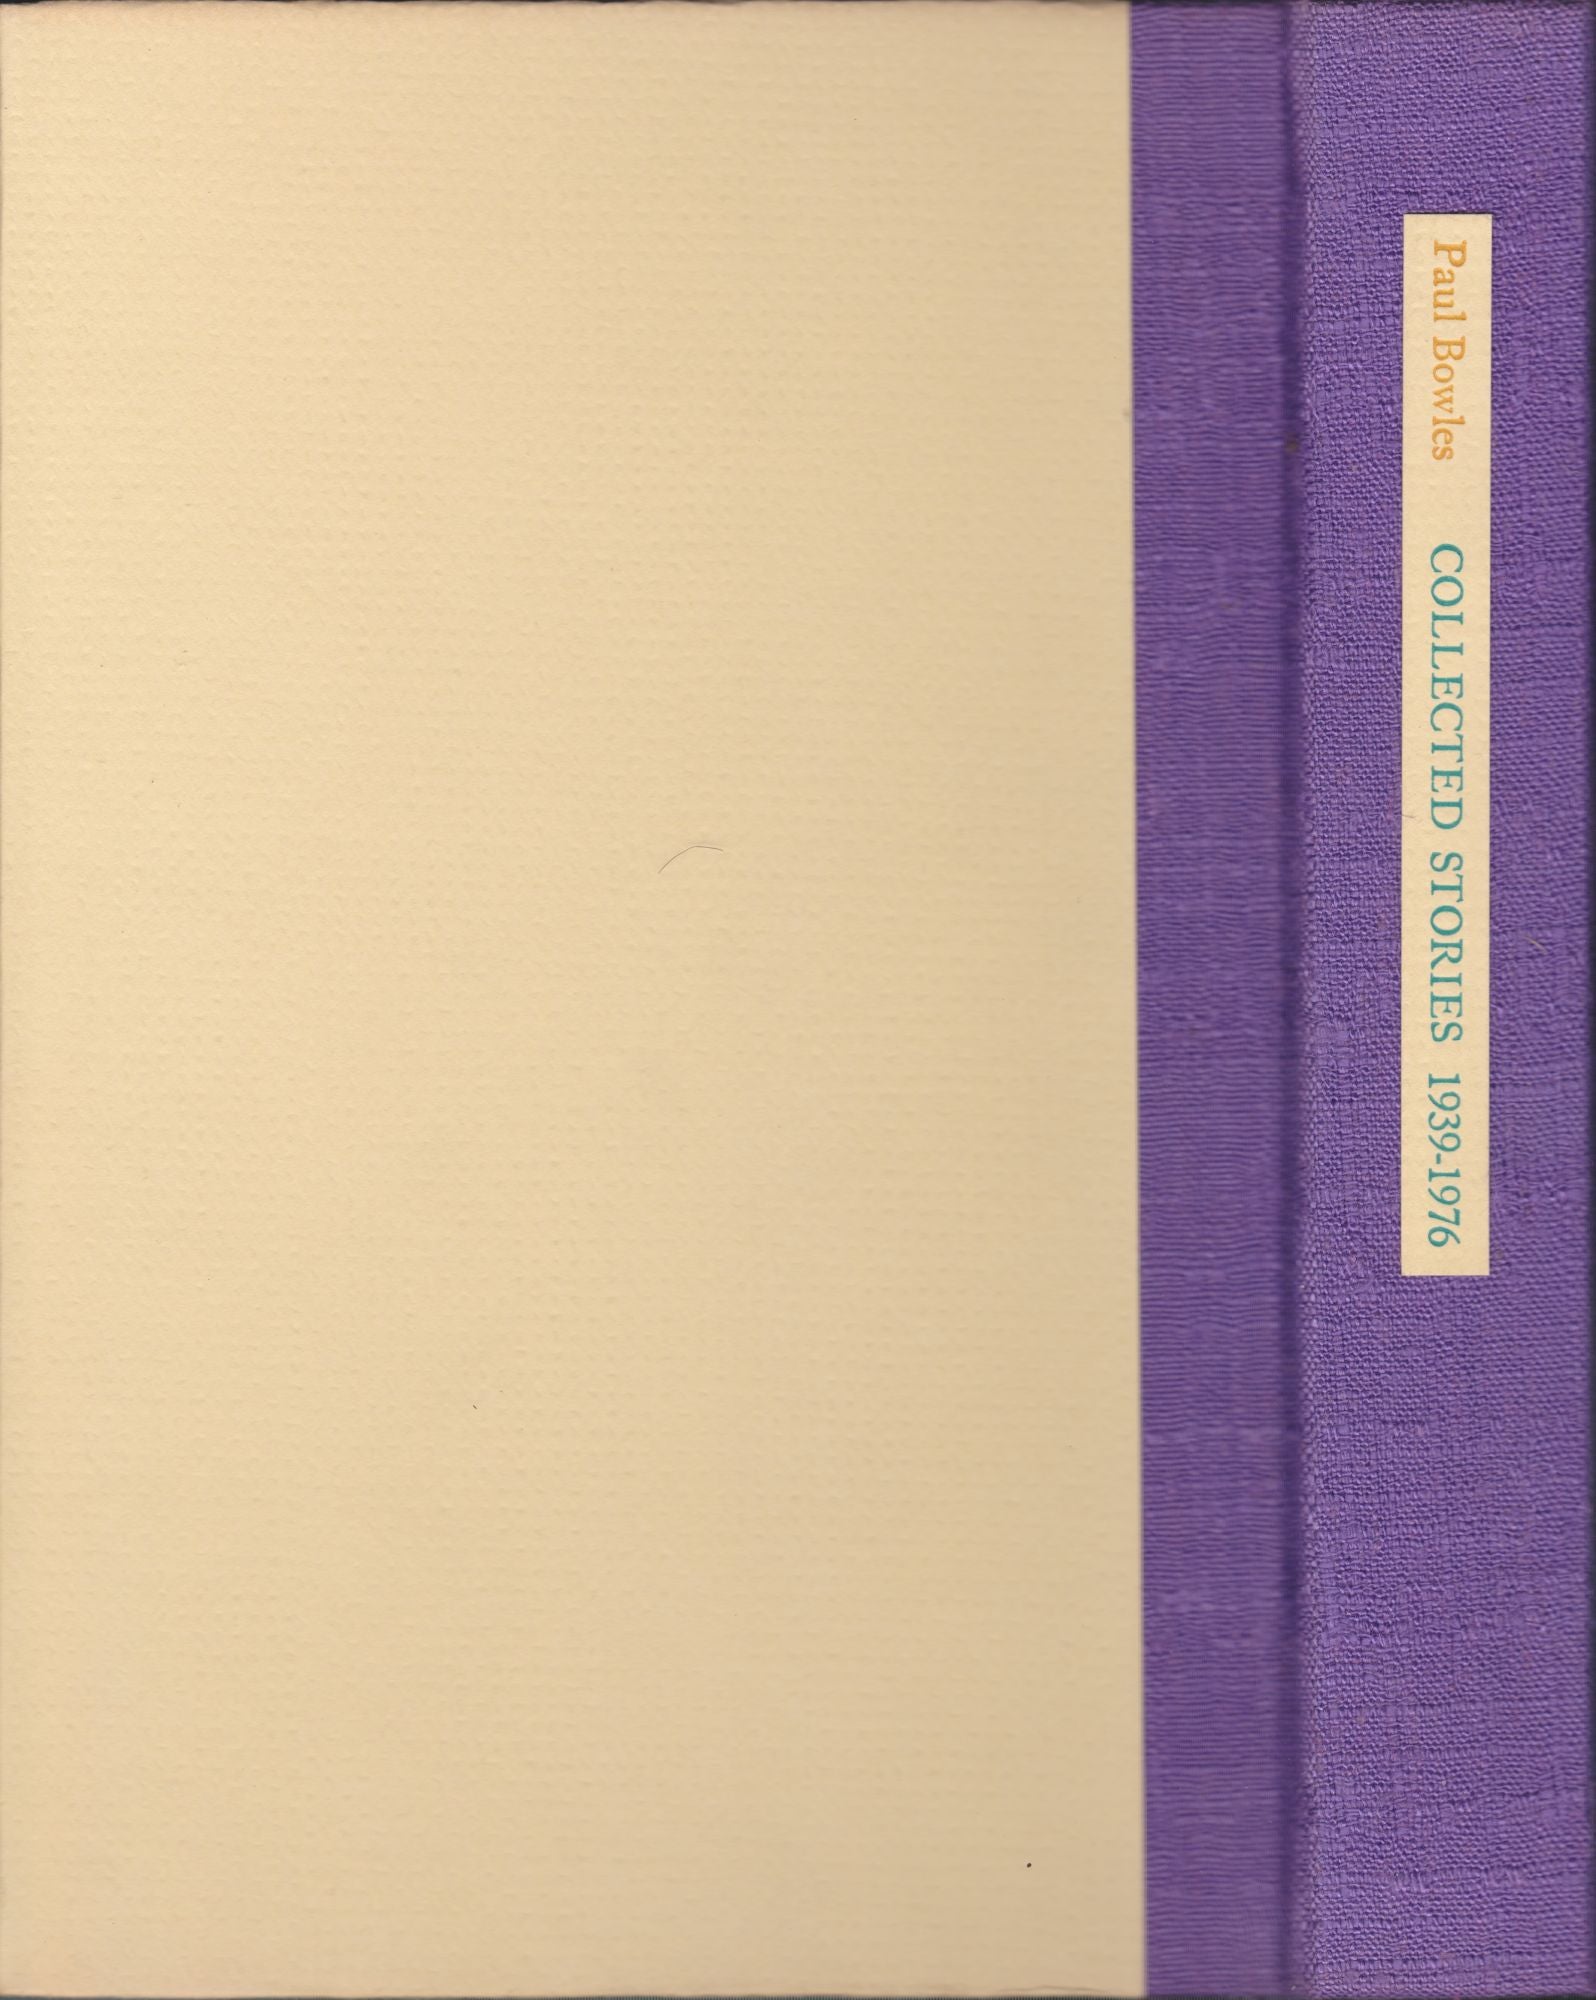 First　1939-1976　Stories　Collected　Edition　Paul　Bowles